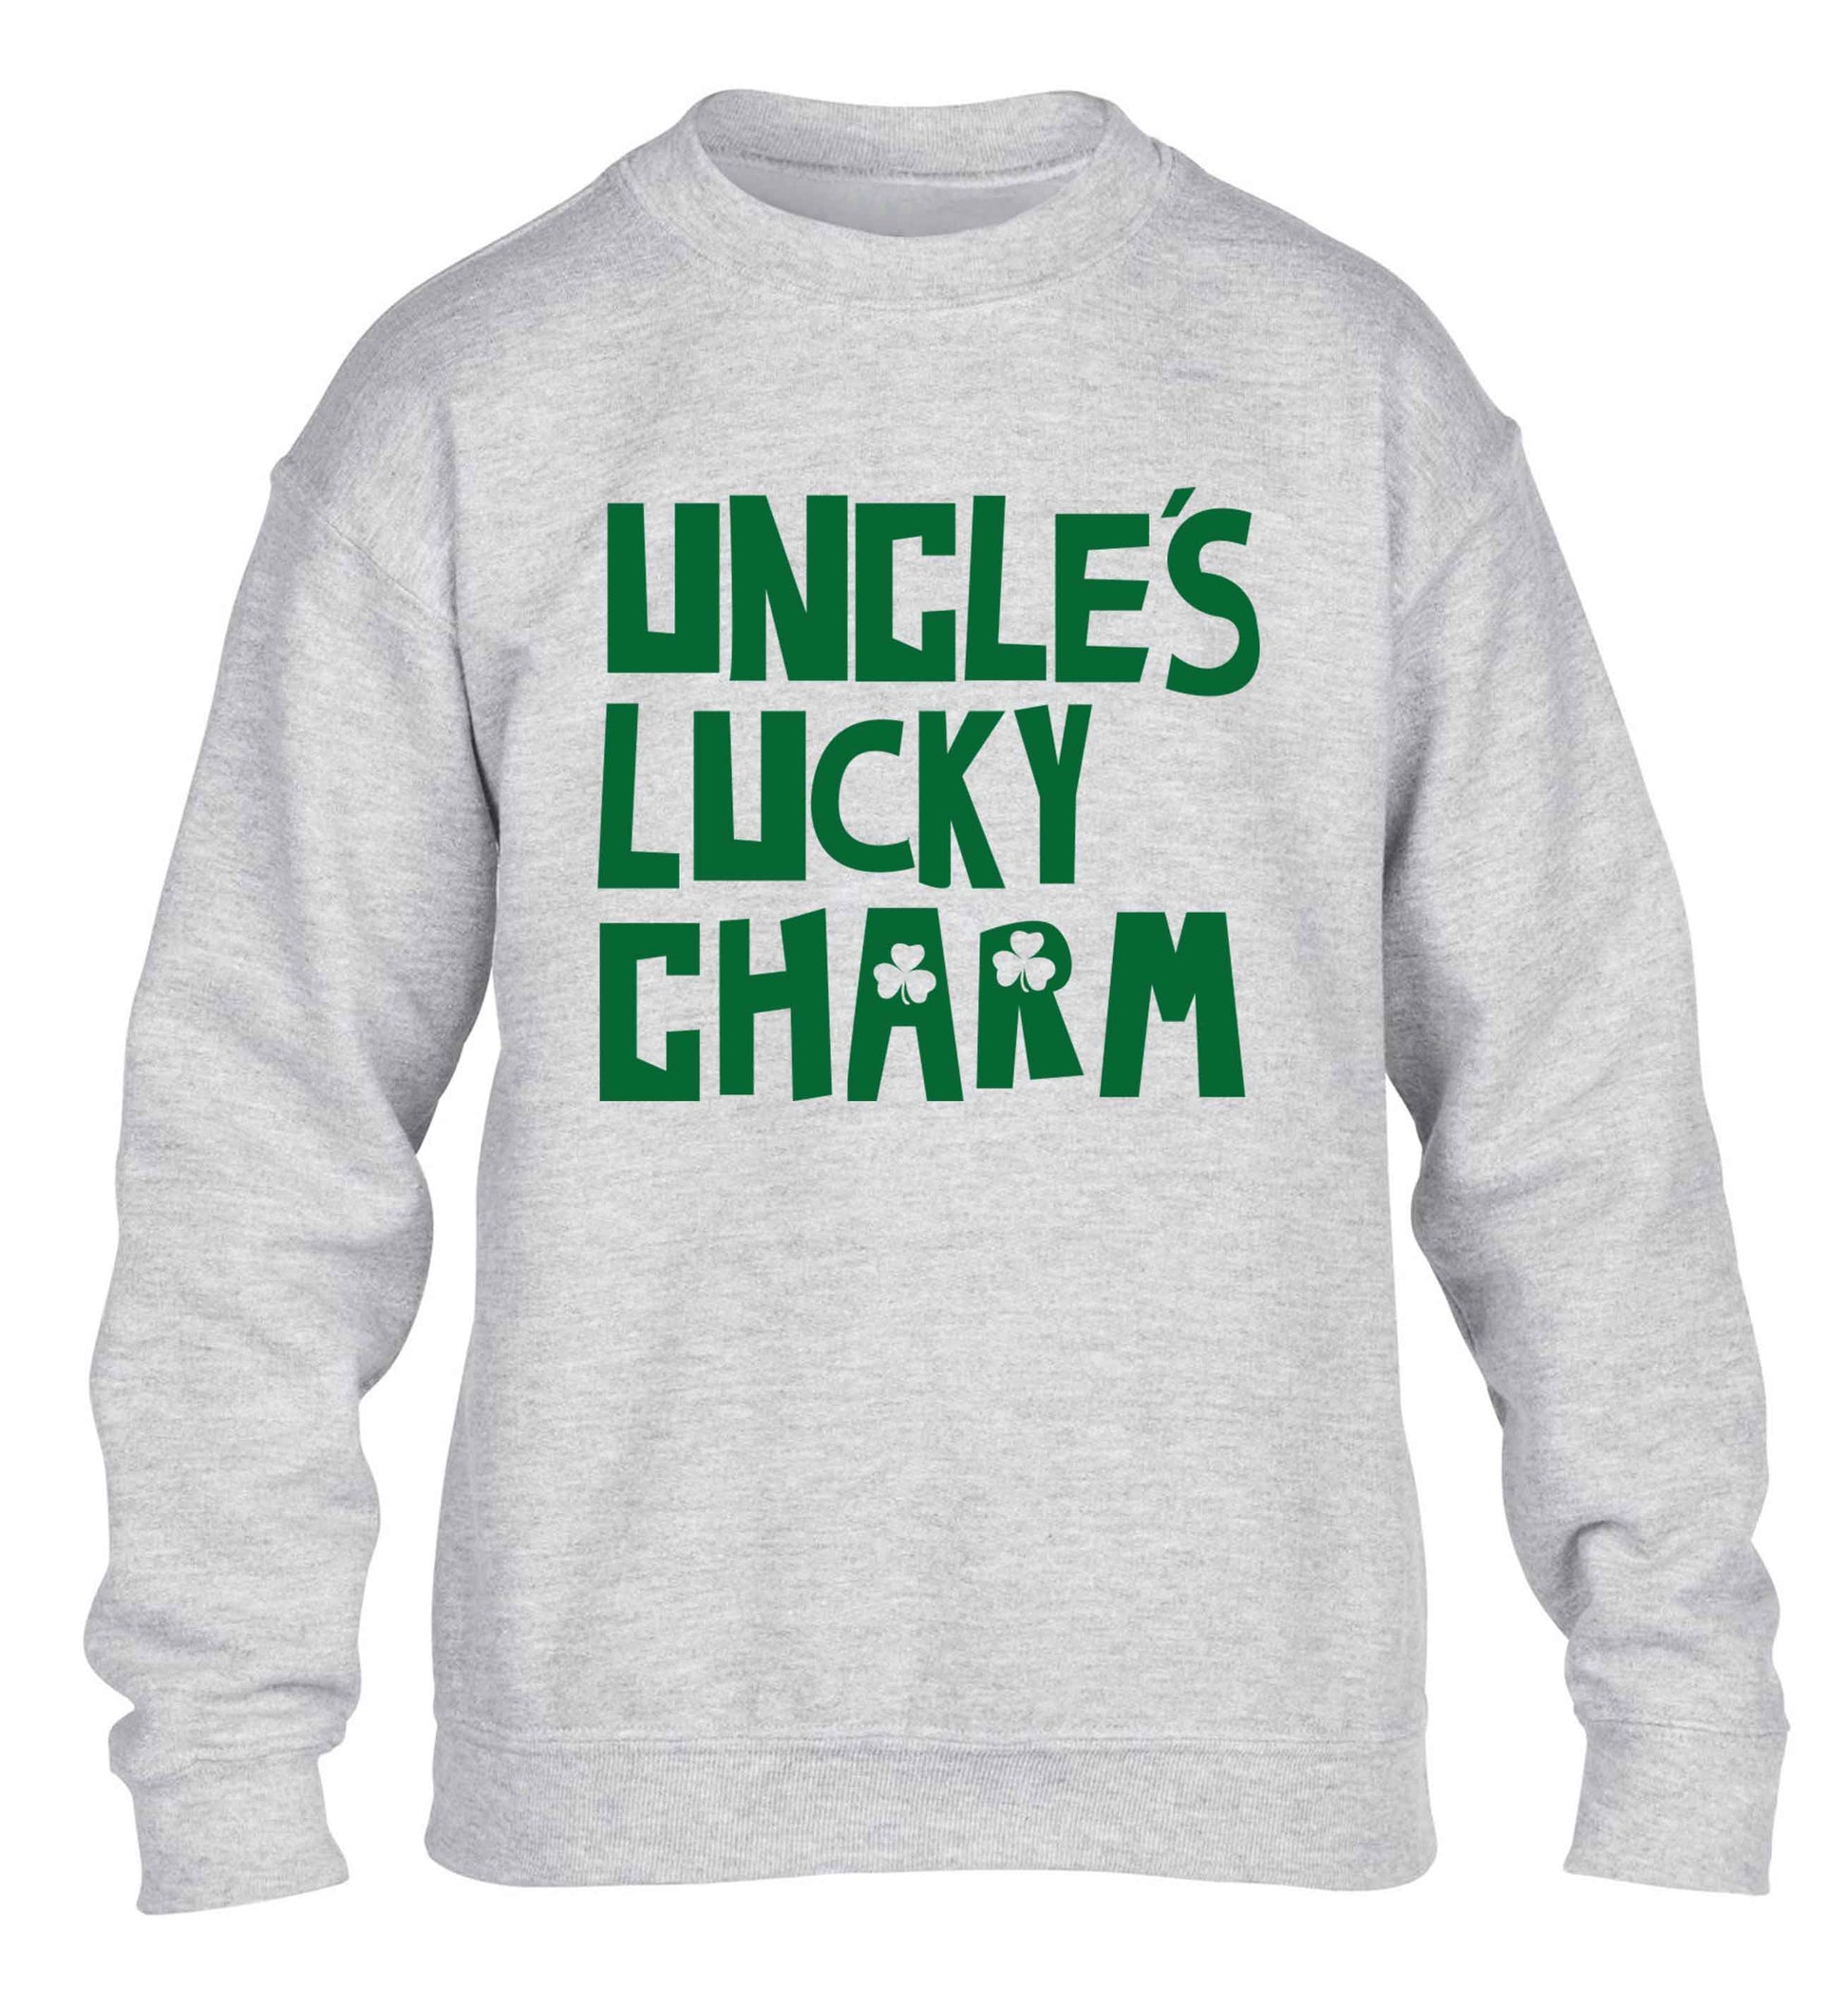 Uncles lucky charm children's grey sweater 12-13 Years